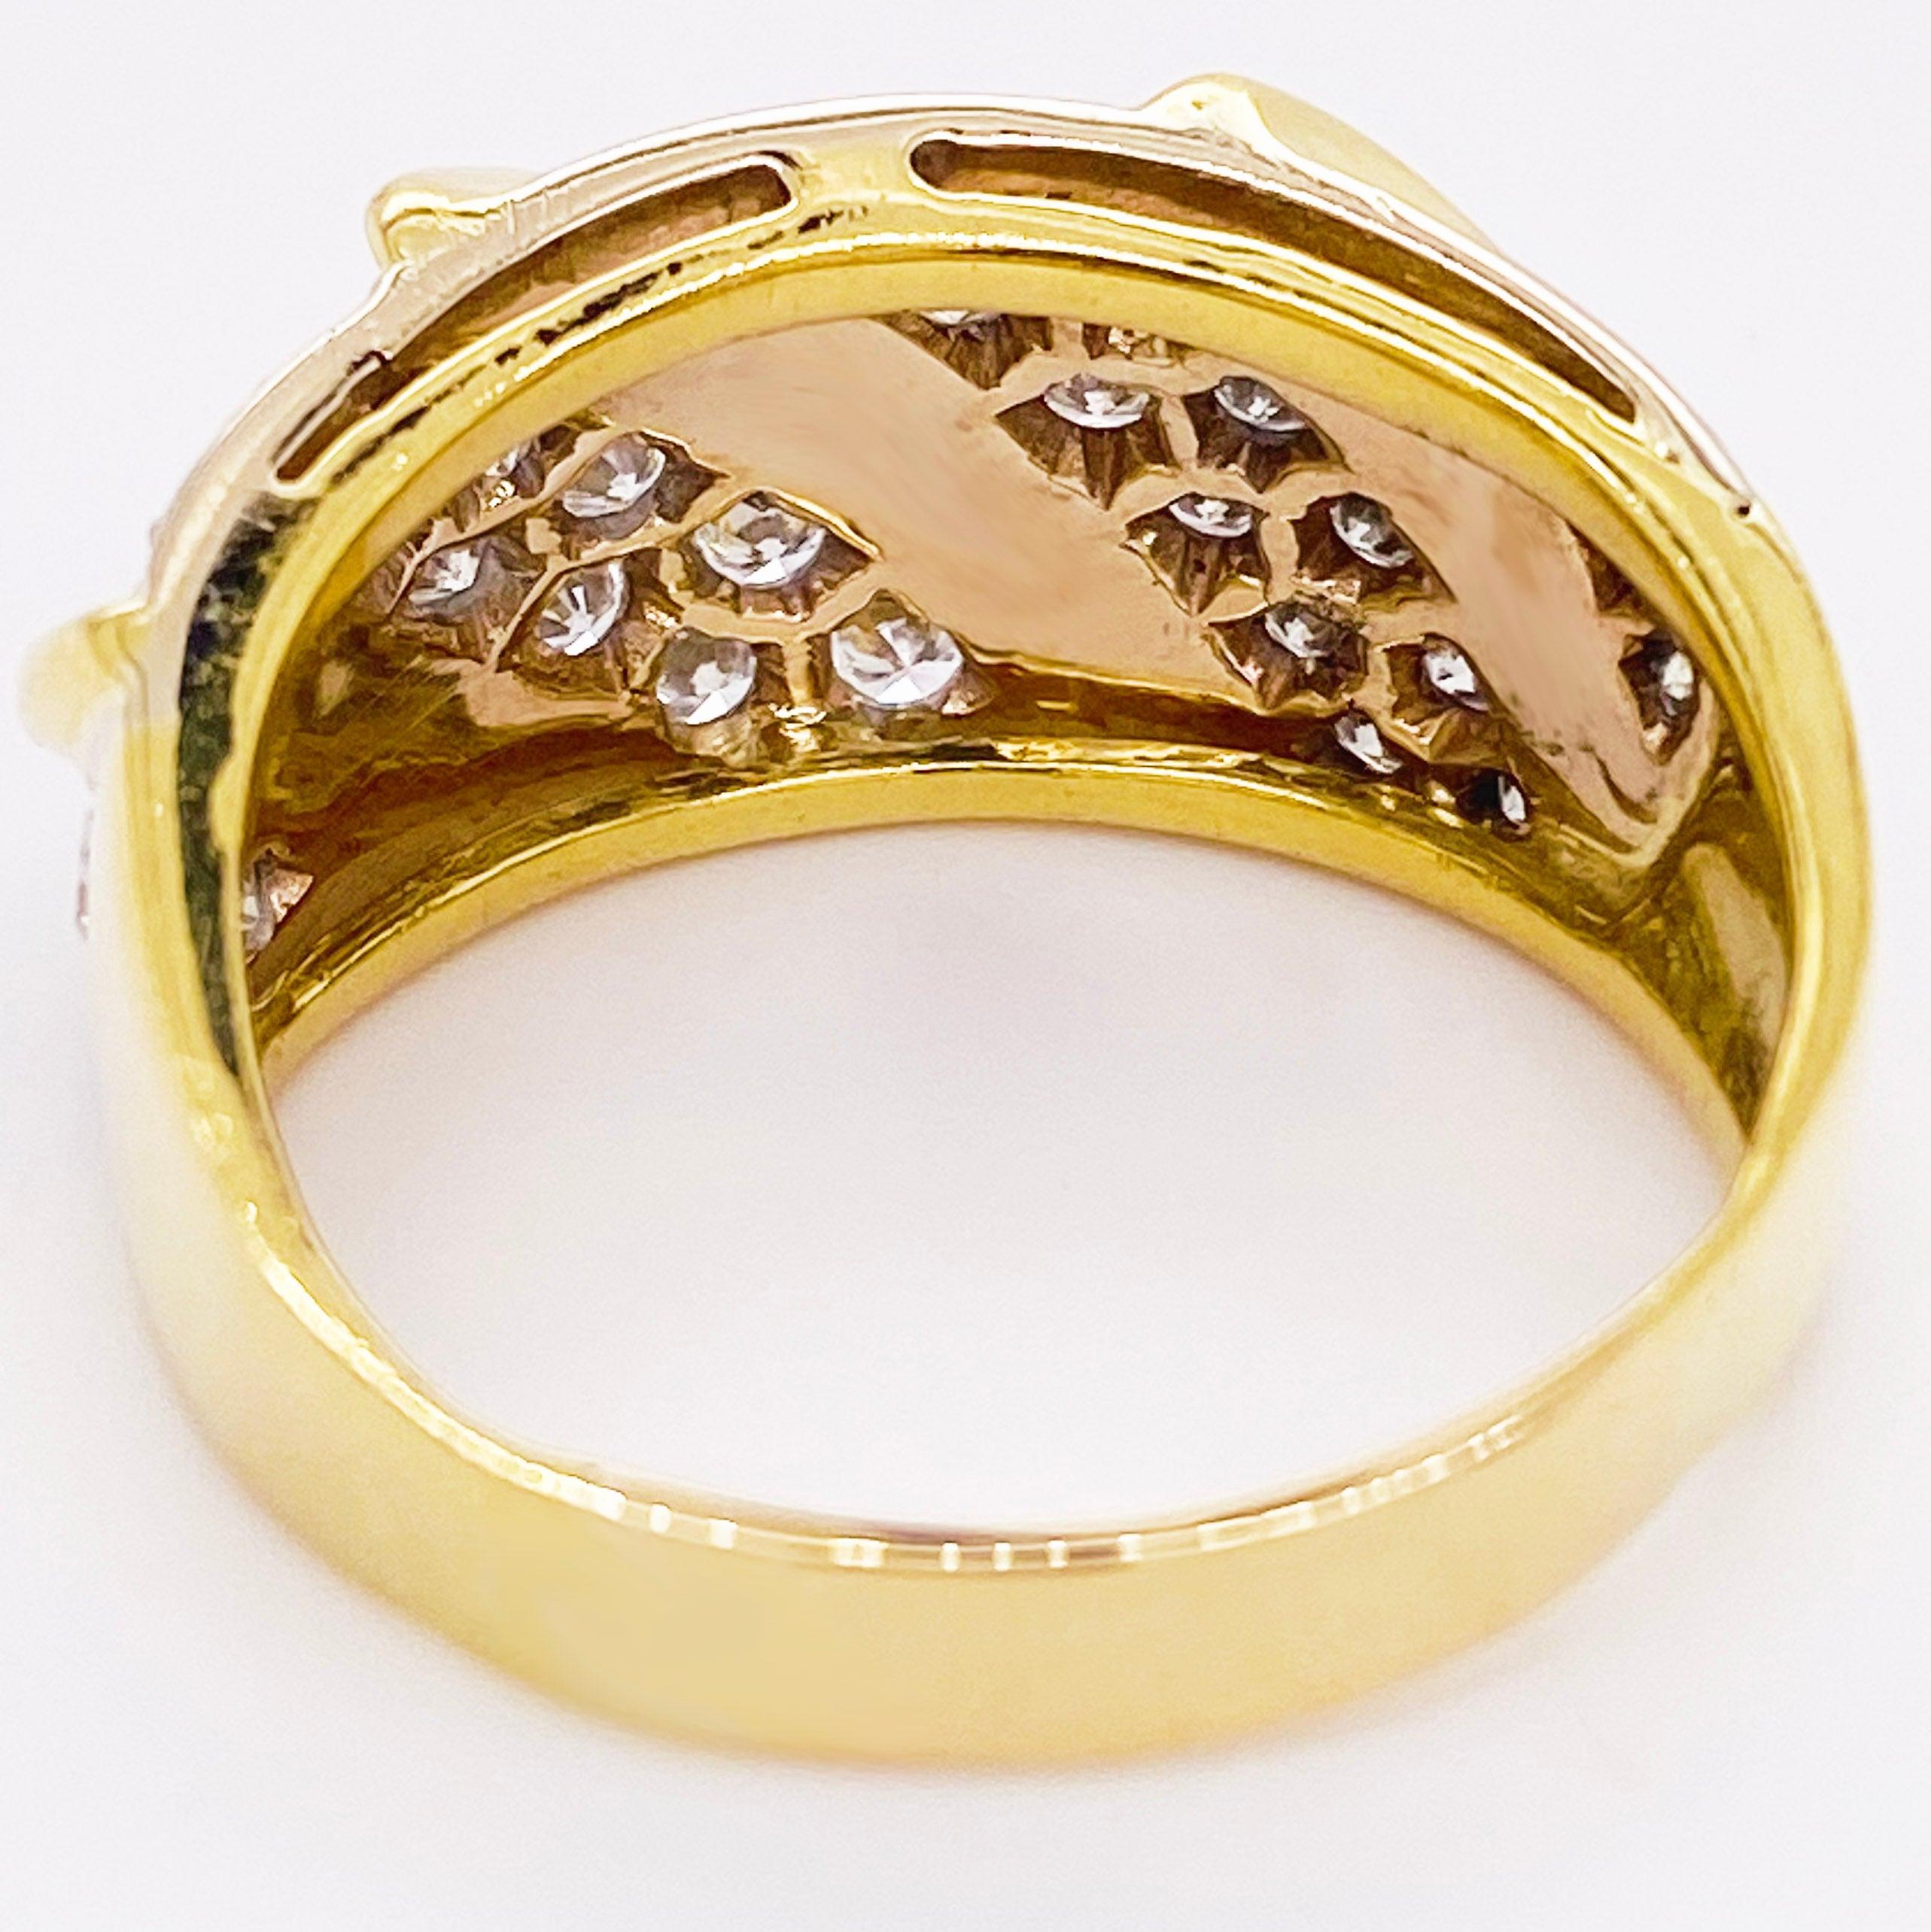 For Sale:  Wide Diamond Band, Yellow Gold, Bombe, Twisted Band, Pave Diamonds 6